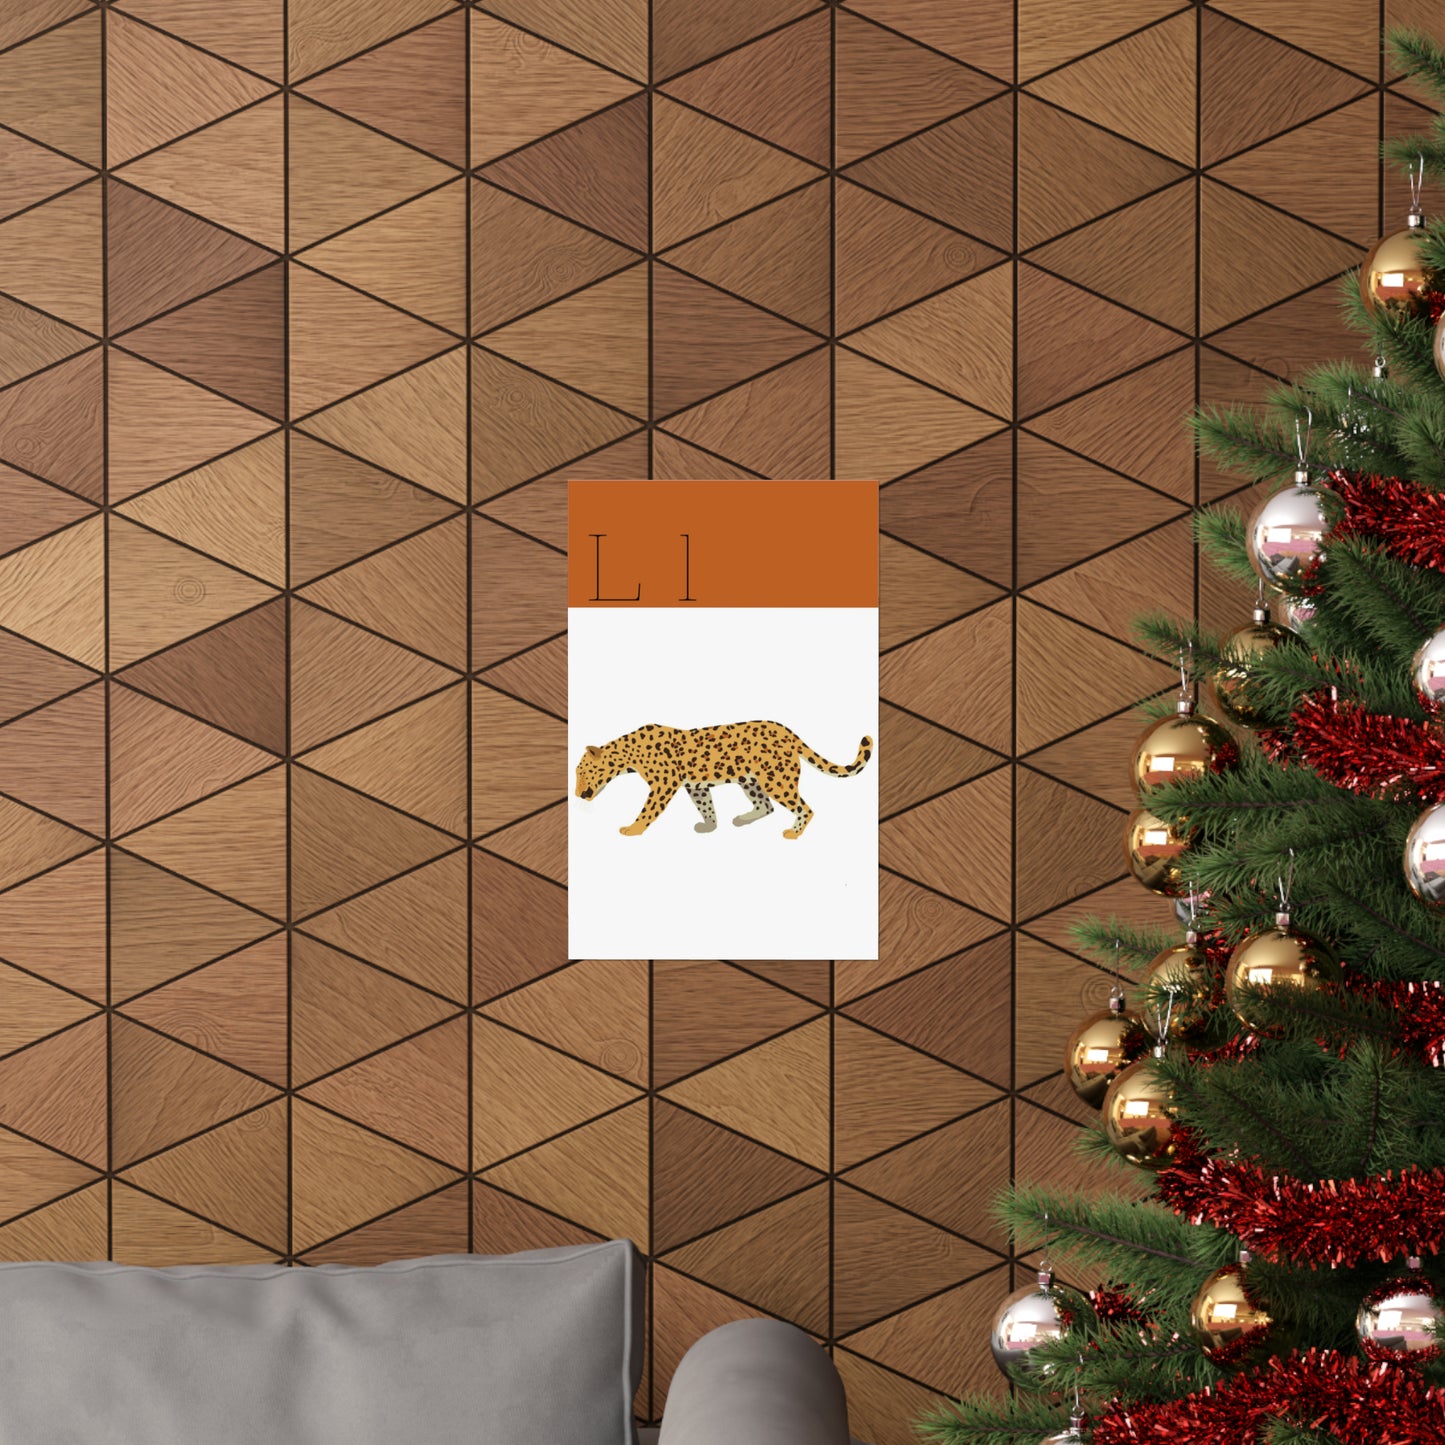 Leopard Poster On Wooden Wall Beside a Christmas Tree